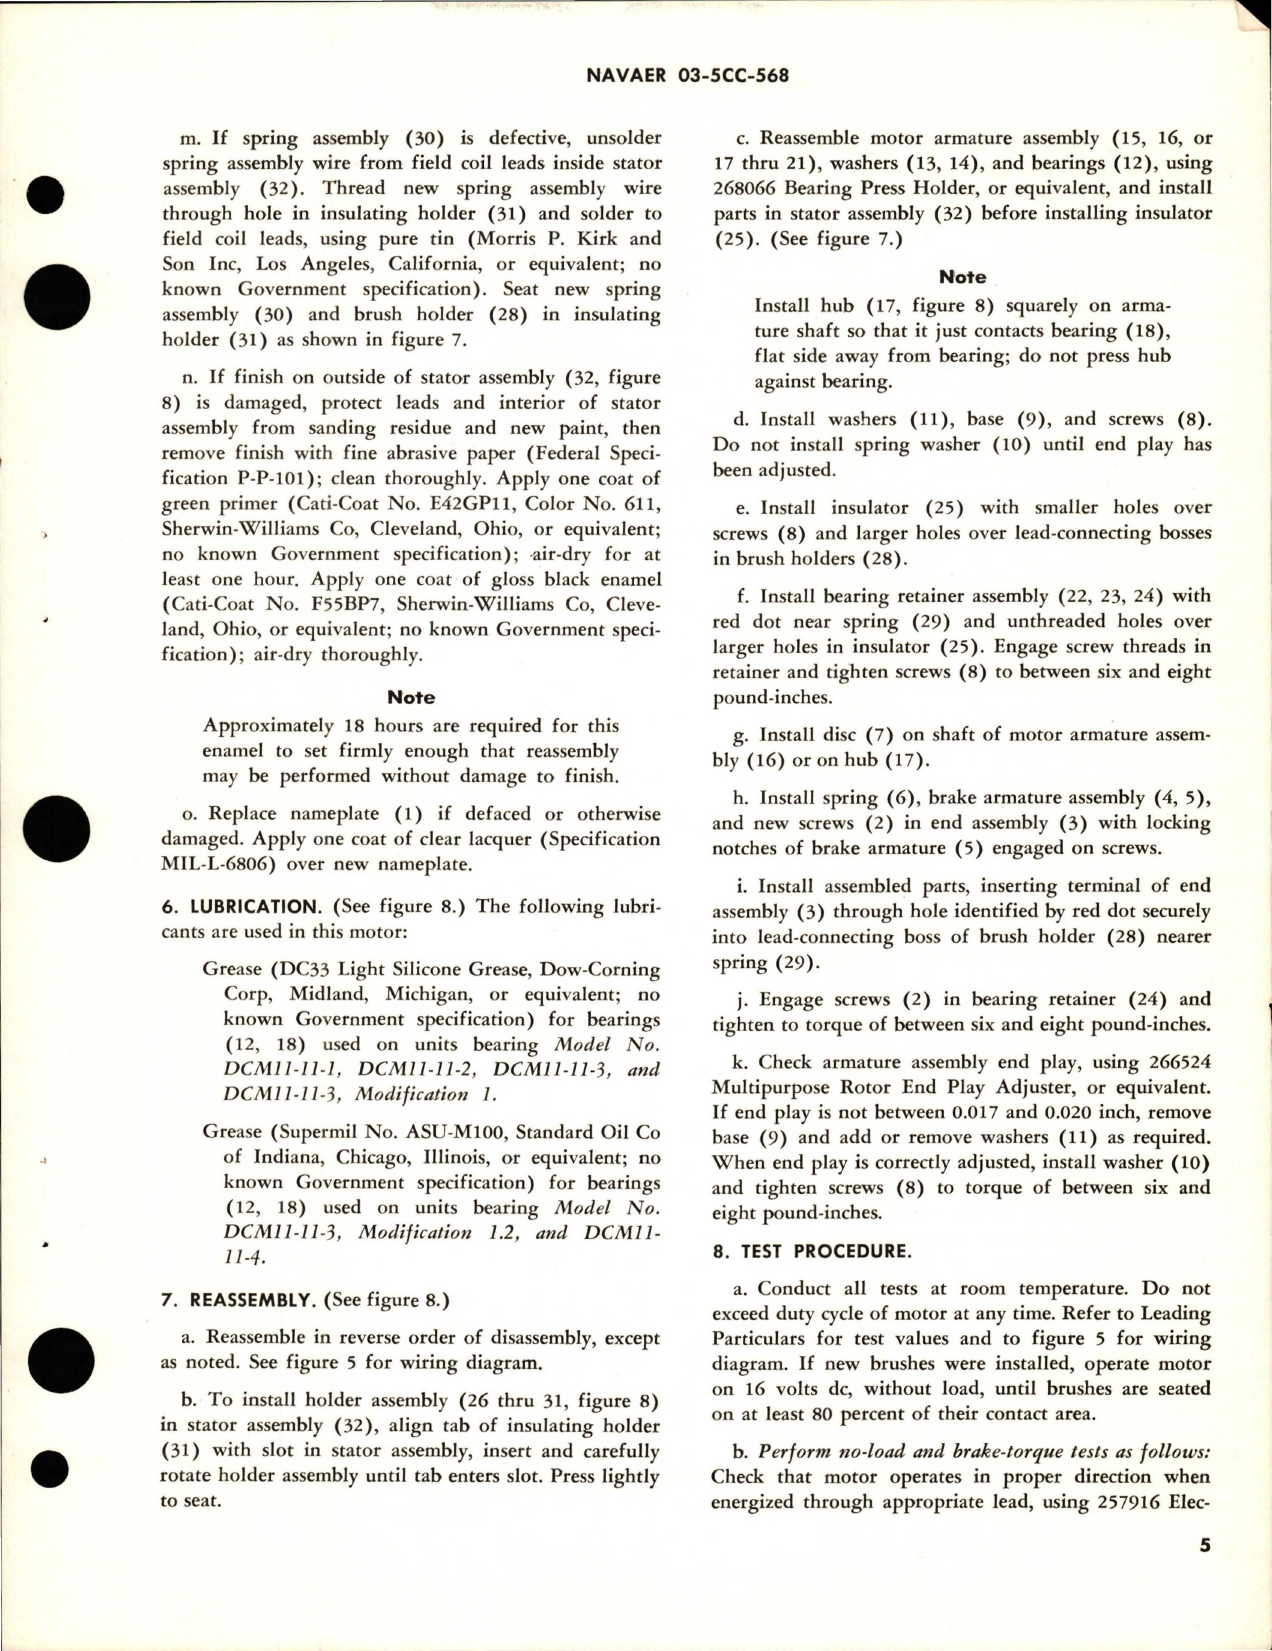 Sample page 5 from AirCorps Library document: Overhaul Instructions with Parts Breakdown for Direct-Current Motor - Part 36848